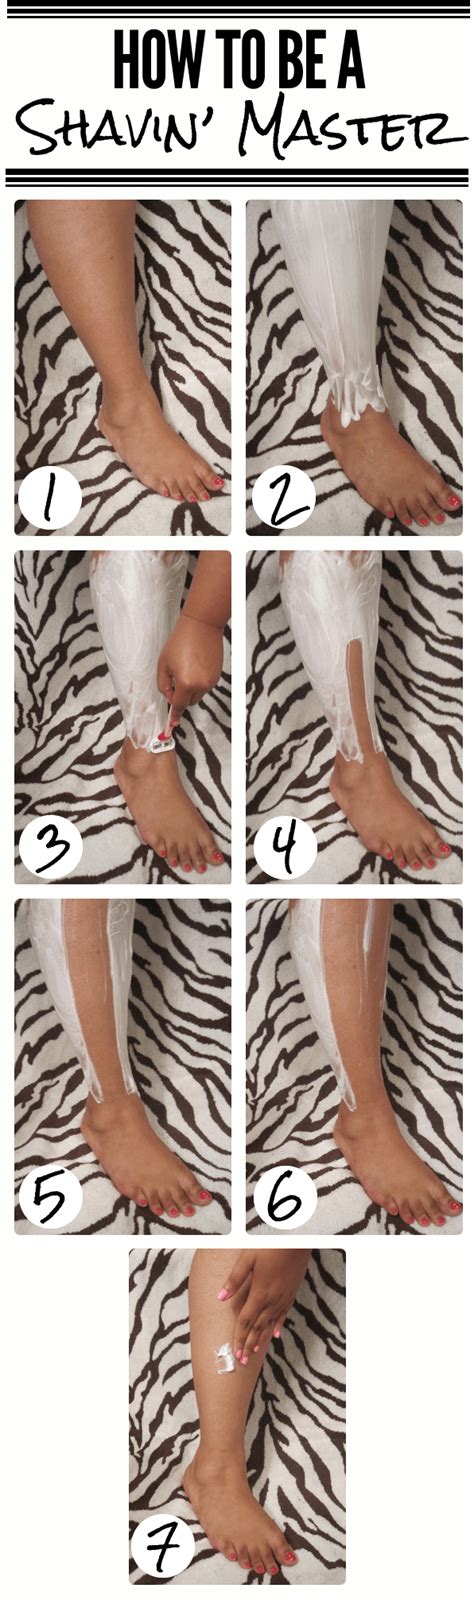 A Few Useful Tips On Shaving Your Legs With Images How To Properly